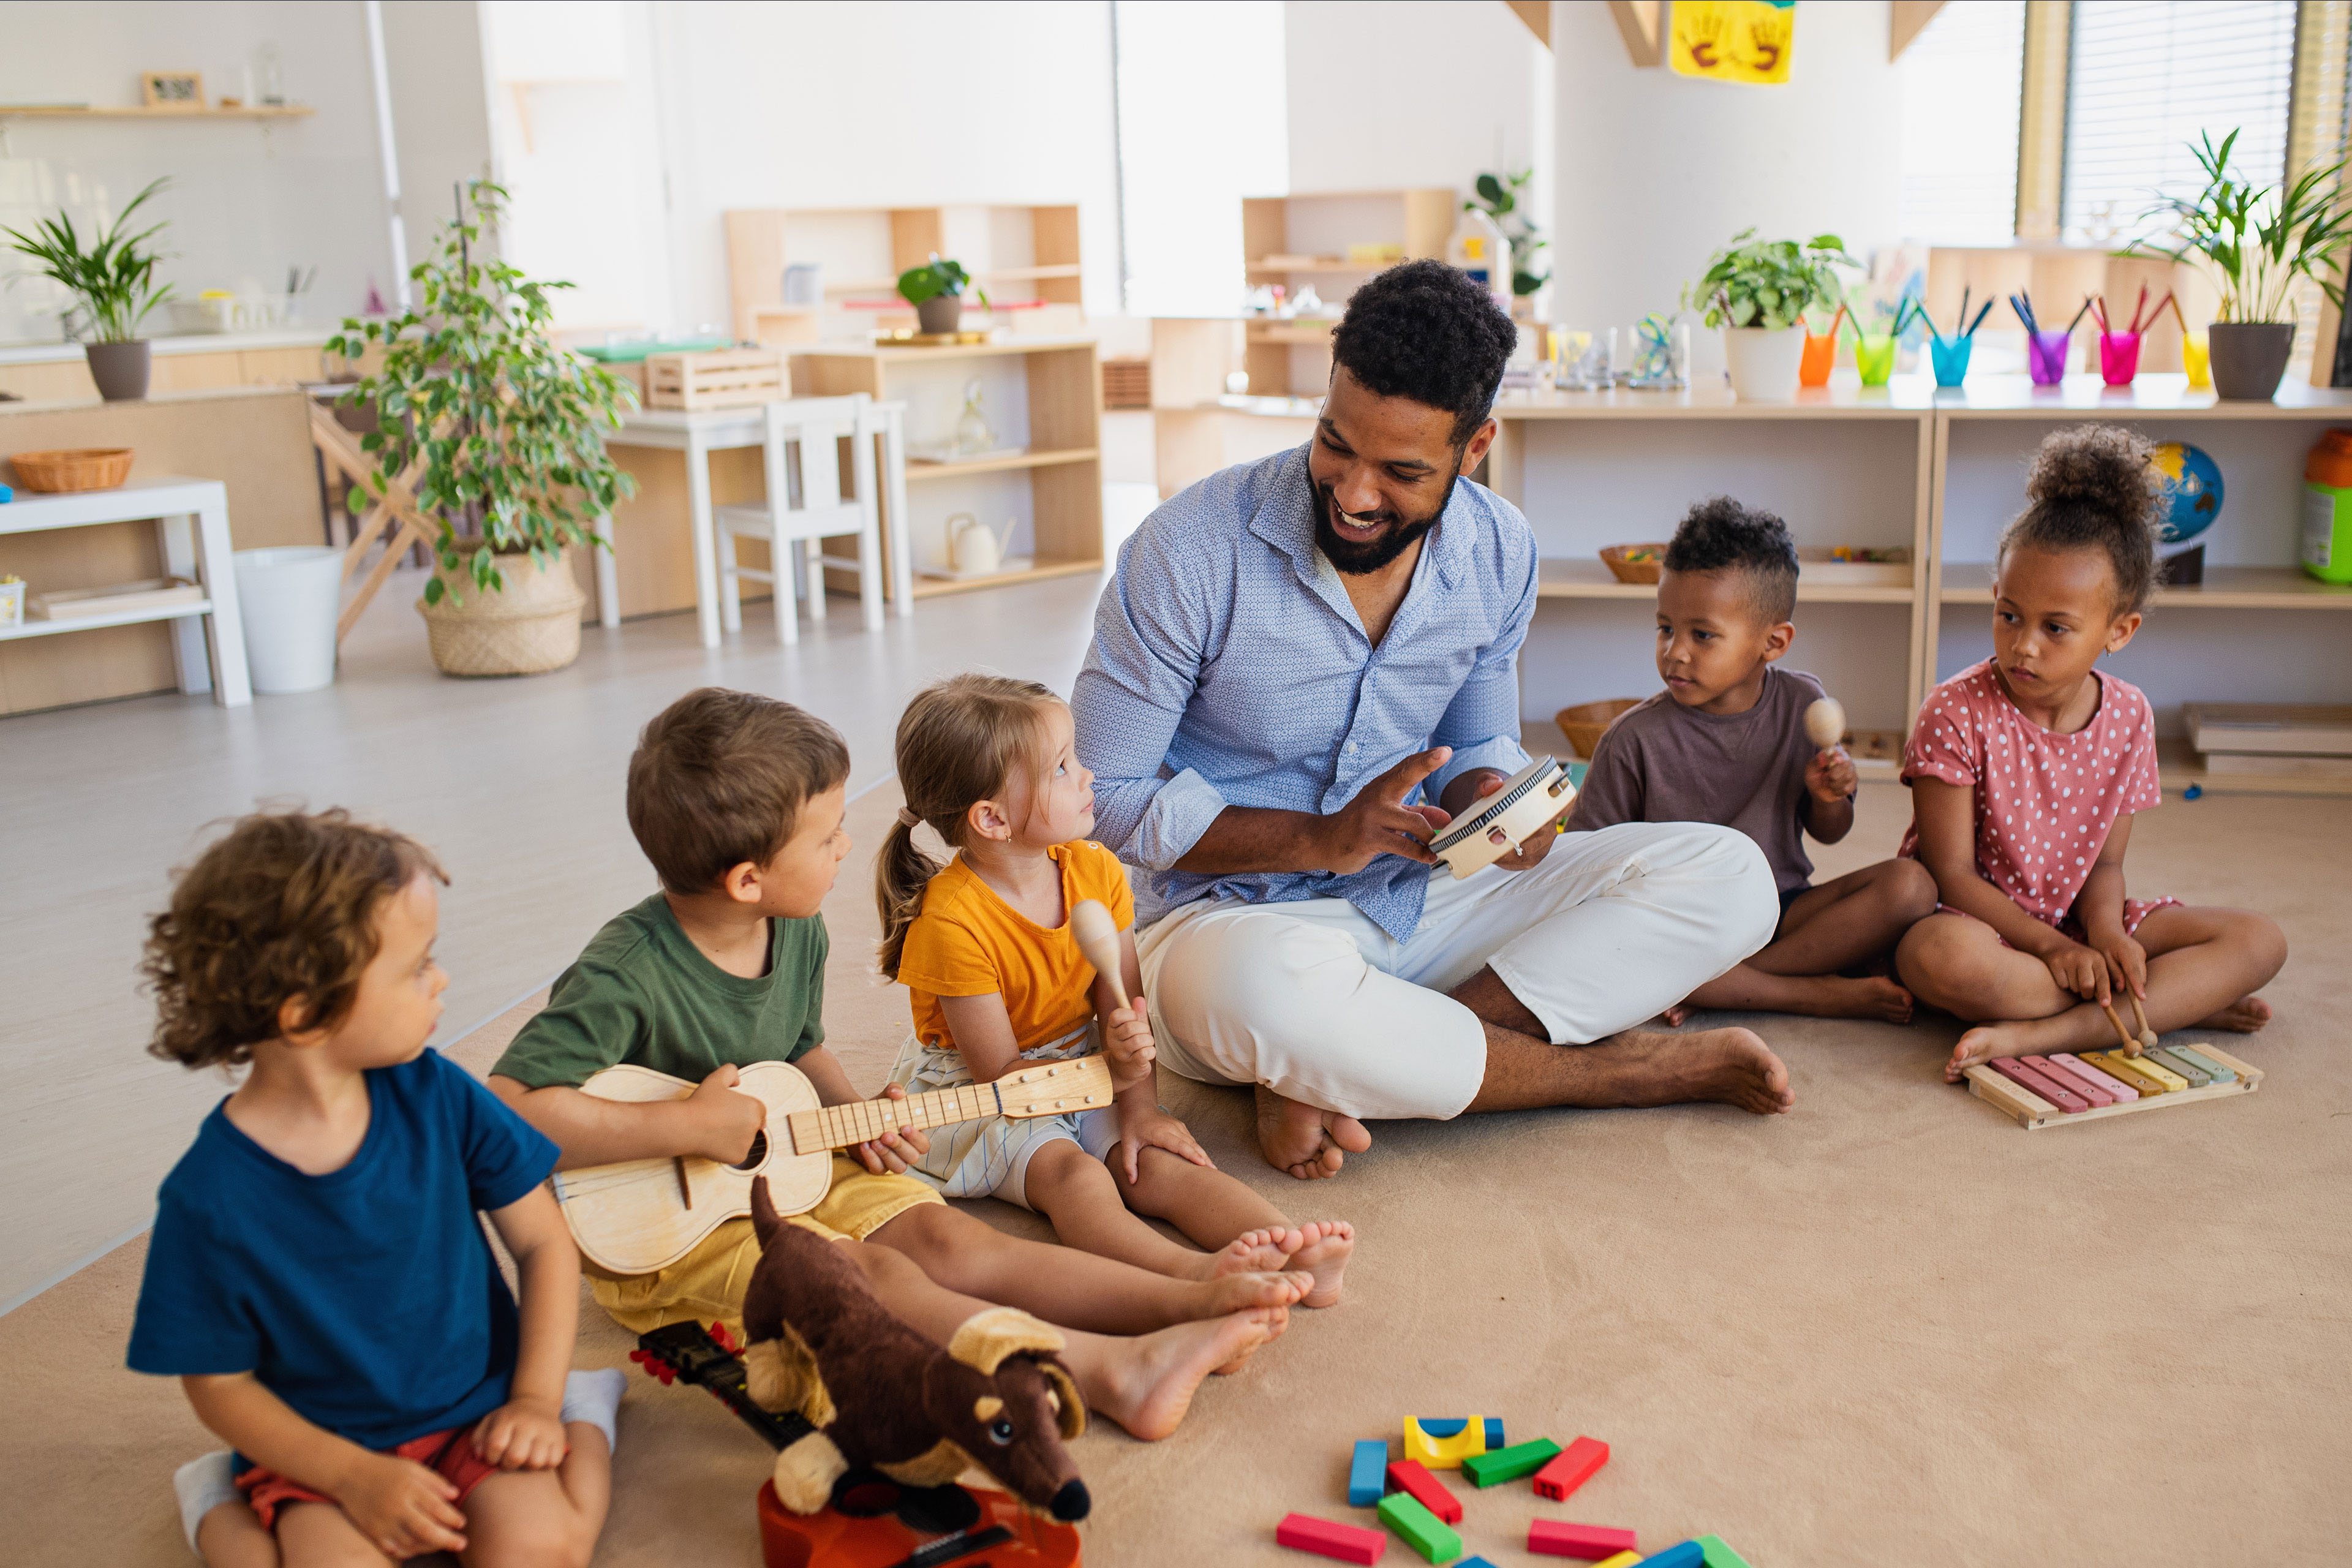 How a state distributed $162.3m in aid to early learning workers. The EY Grants Accelerator helped teams to streamline the grants process and provide crucial support to stakeholders.